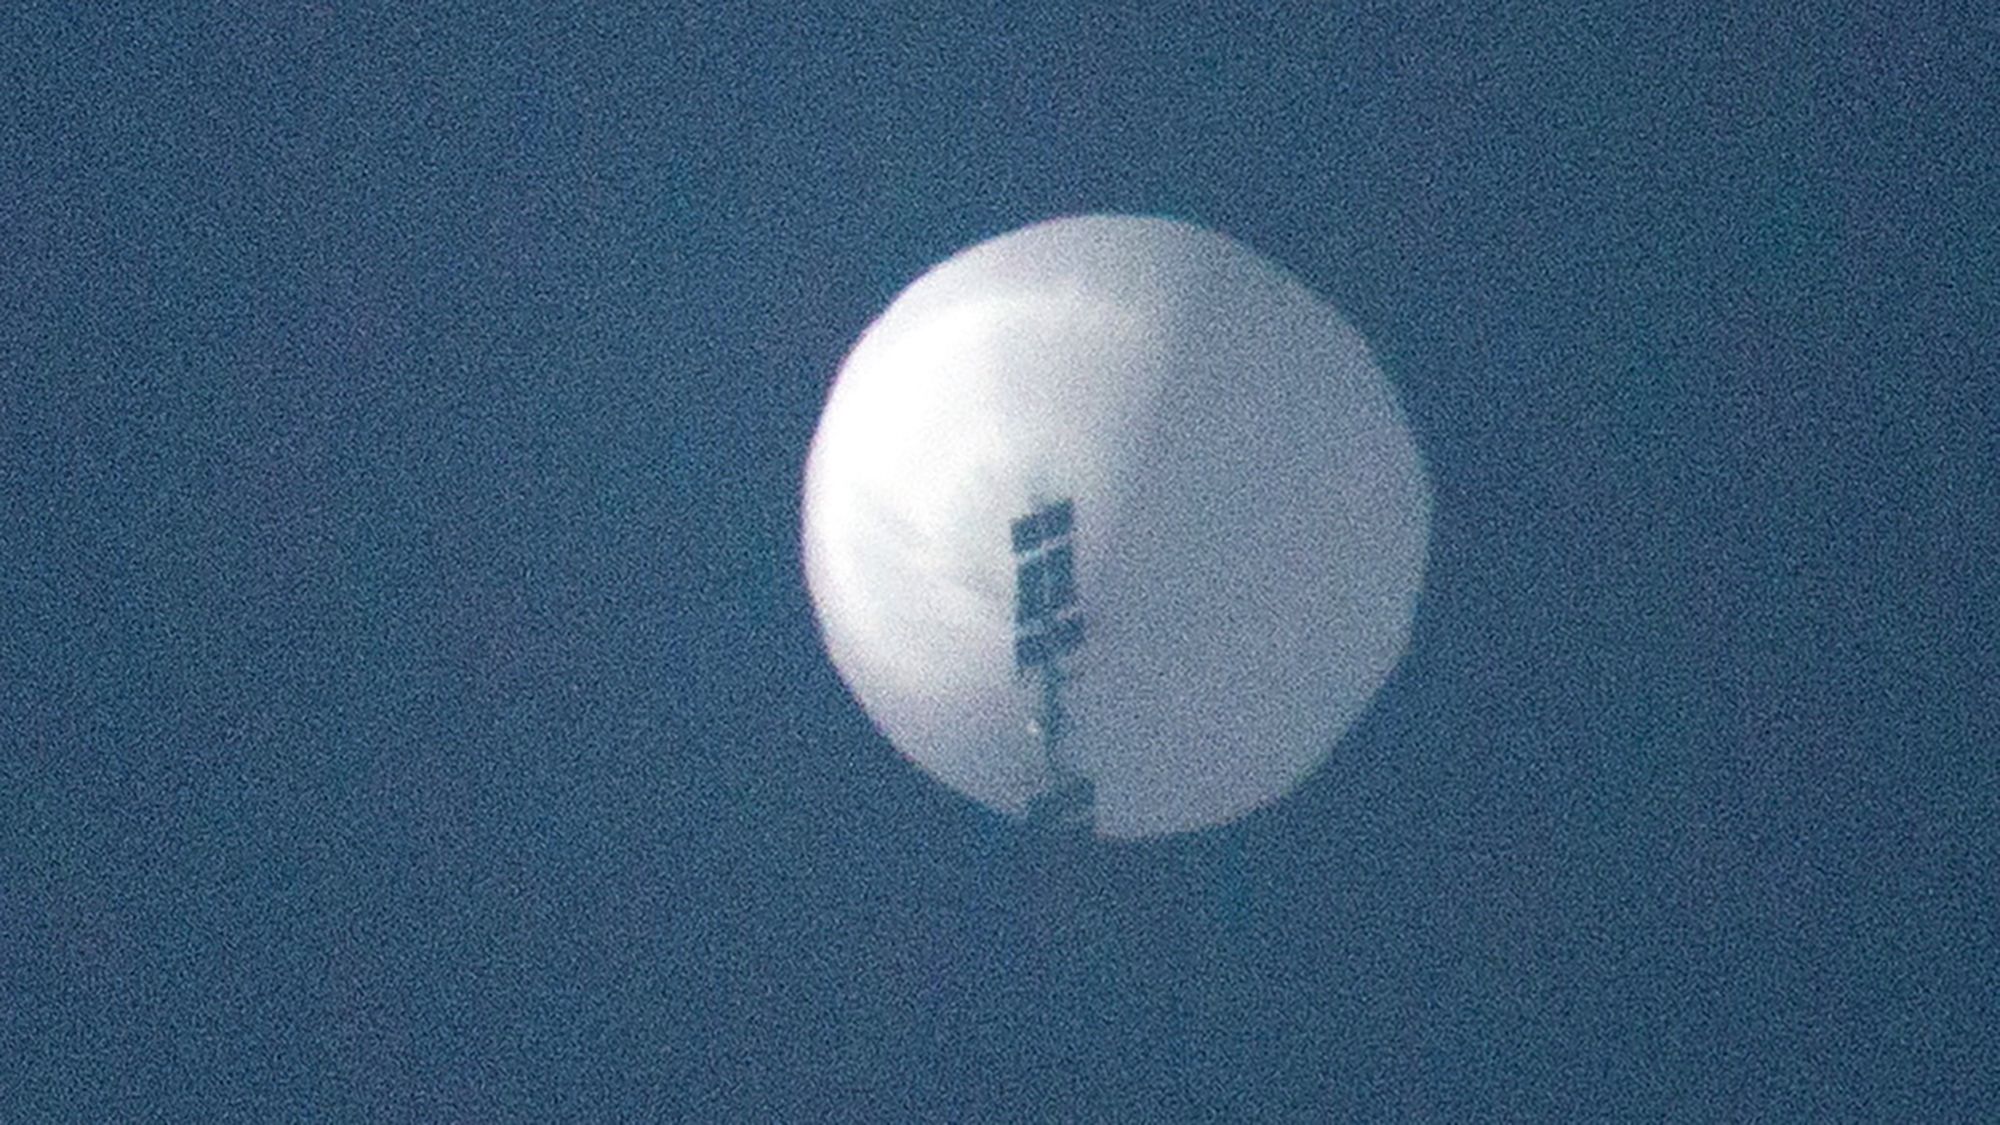 The so-called Chinese "spy balloon" that has caused an uproar in US mainstream media. Photo: Chase Doak via CNN.